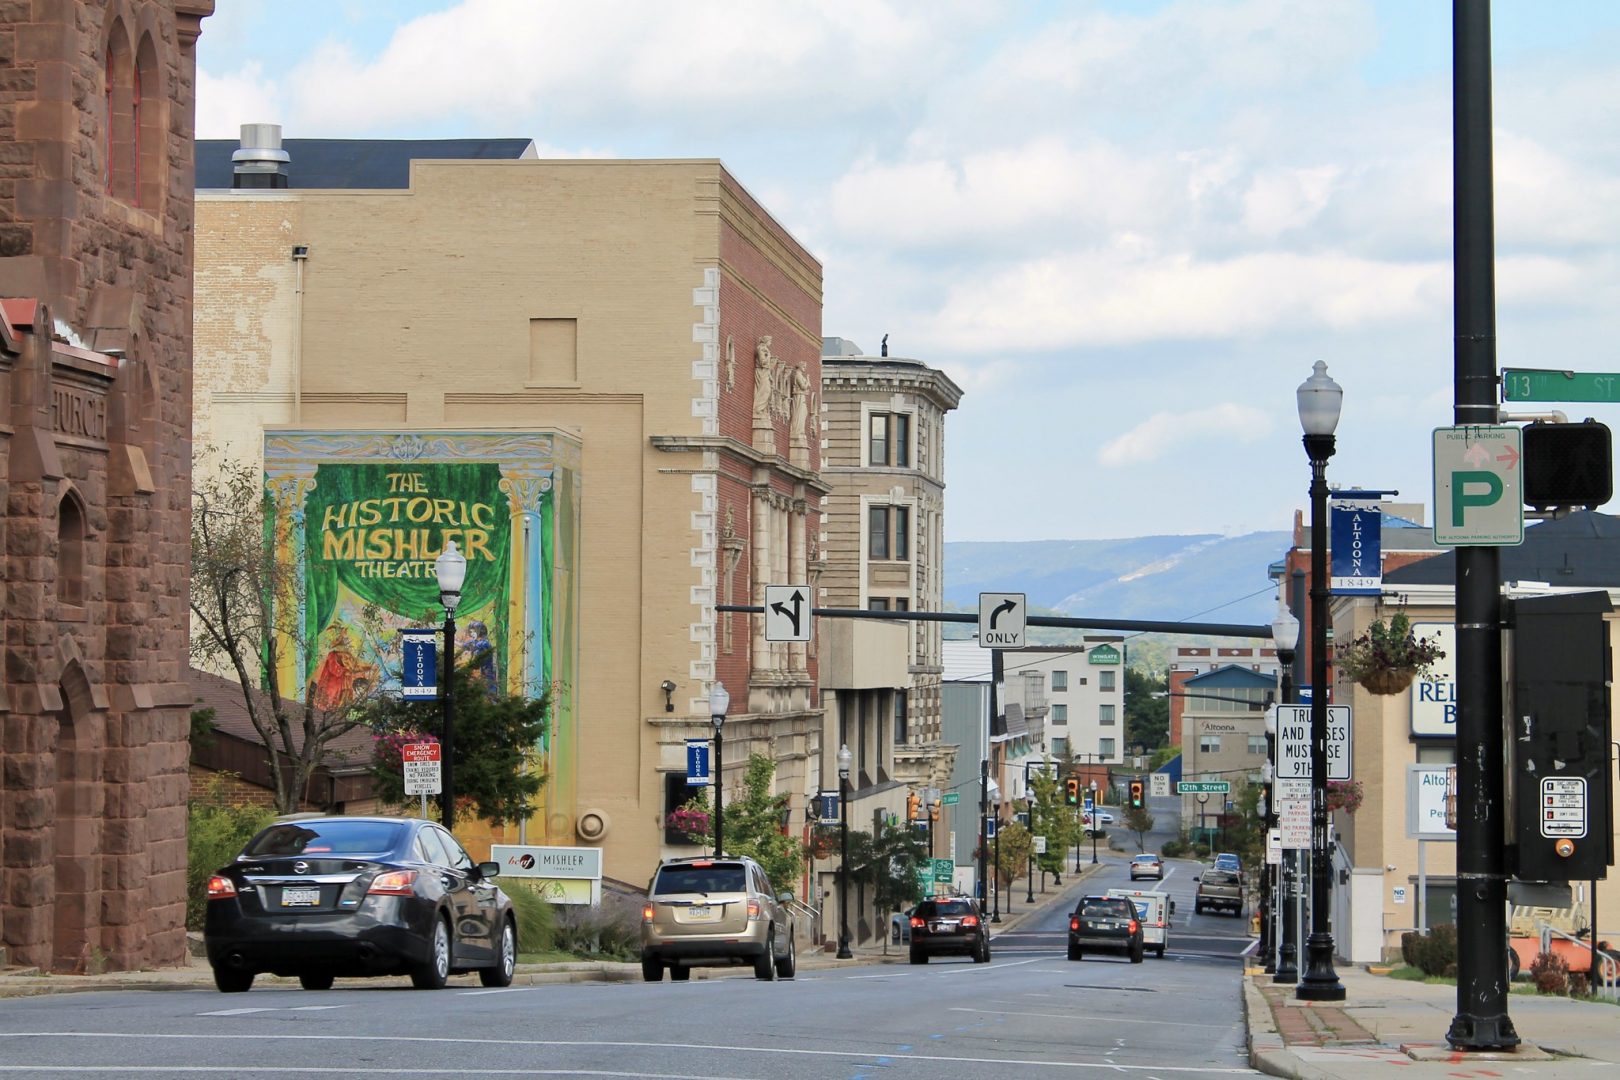 Looking northwest from the intersection of 12th Ave. and 13th St. in downtown Altoona, Pa.